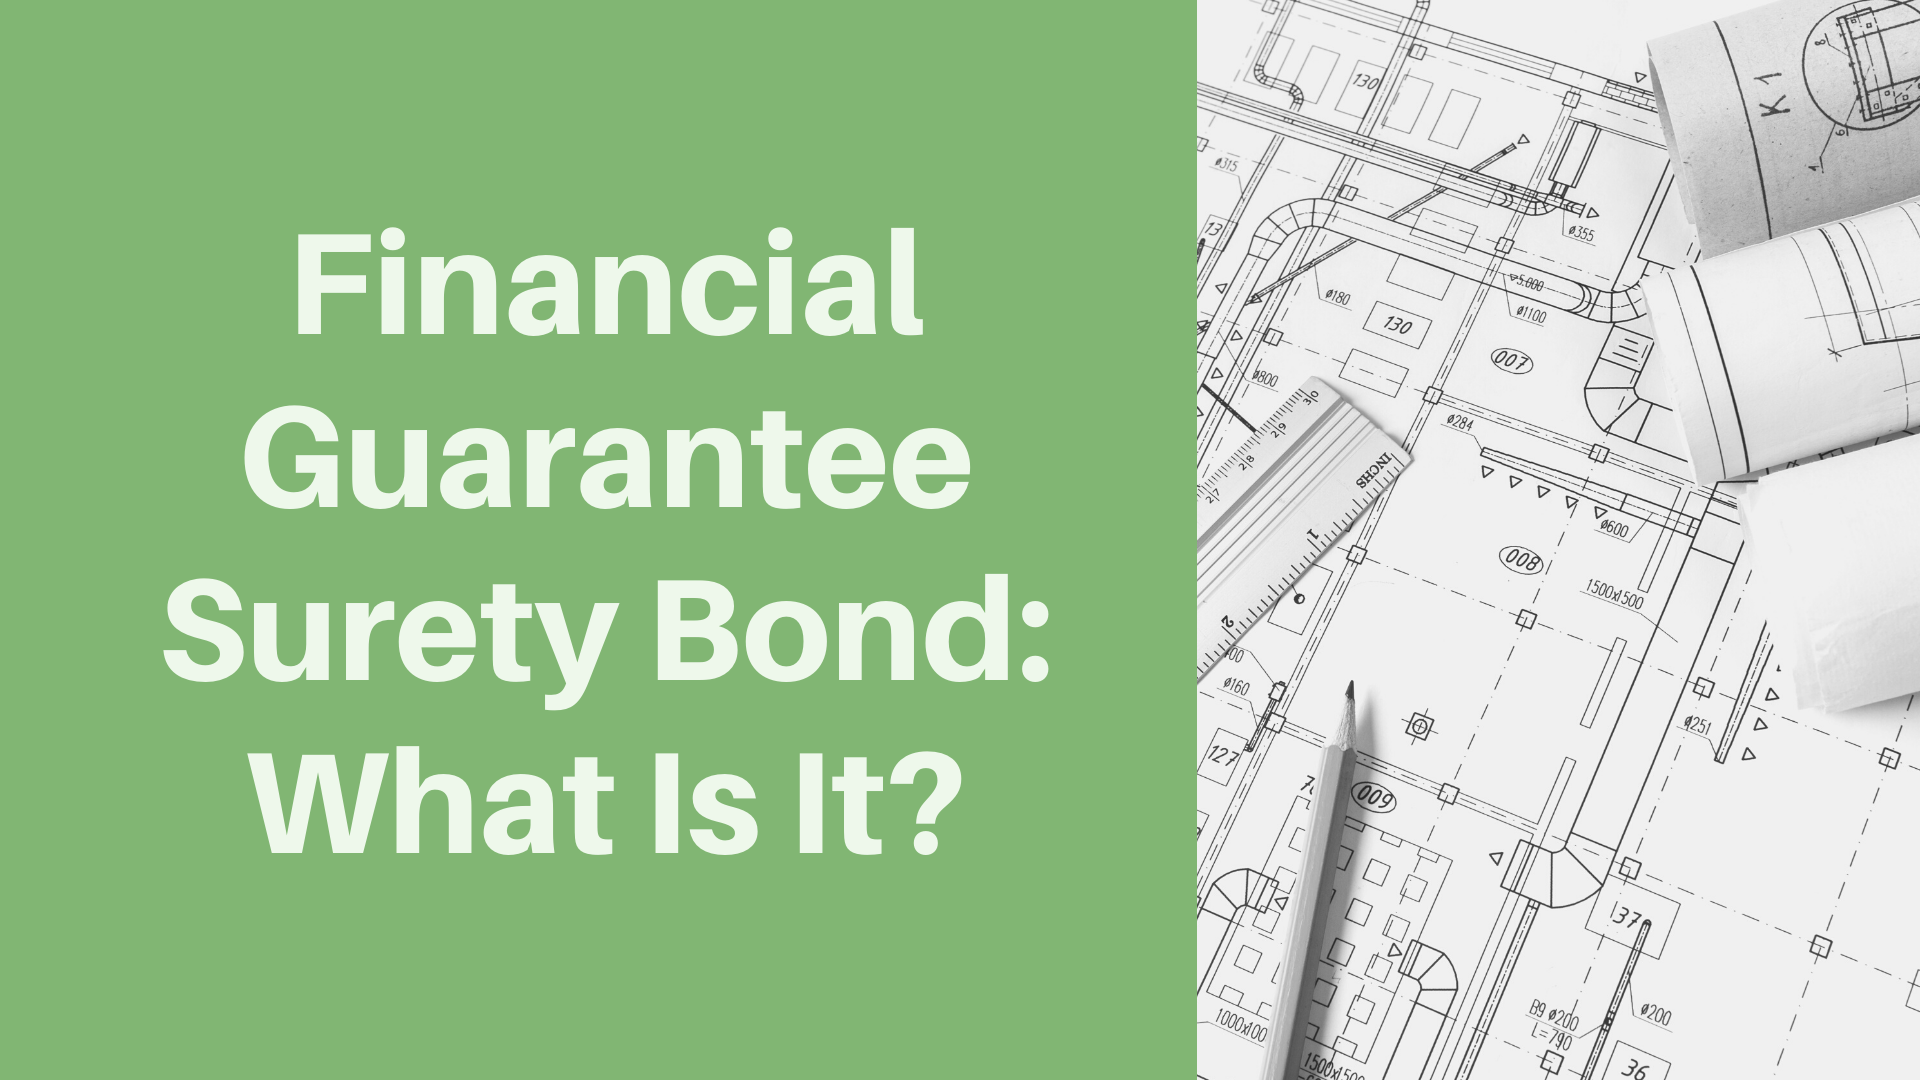 surety bond - What Should You Know About Surety Bonds for Financial Guarantees - building plan